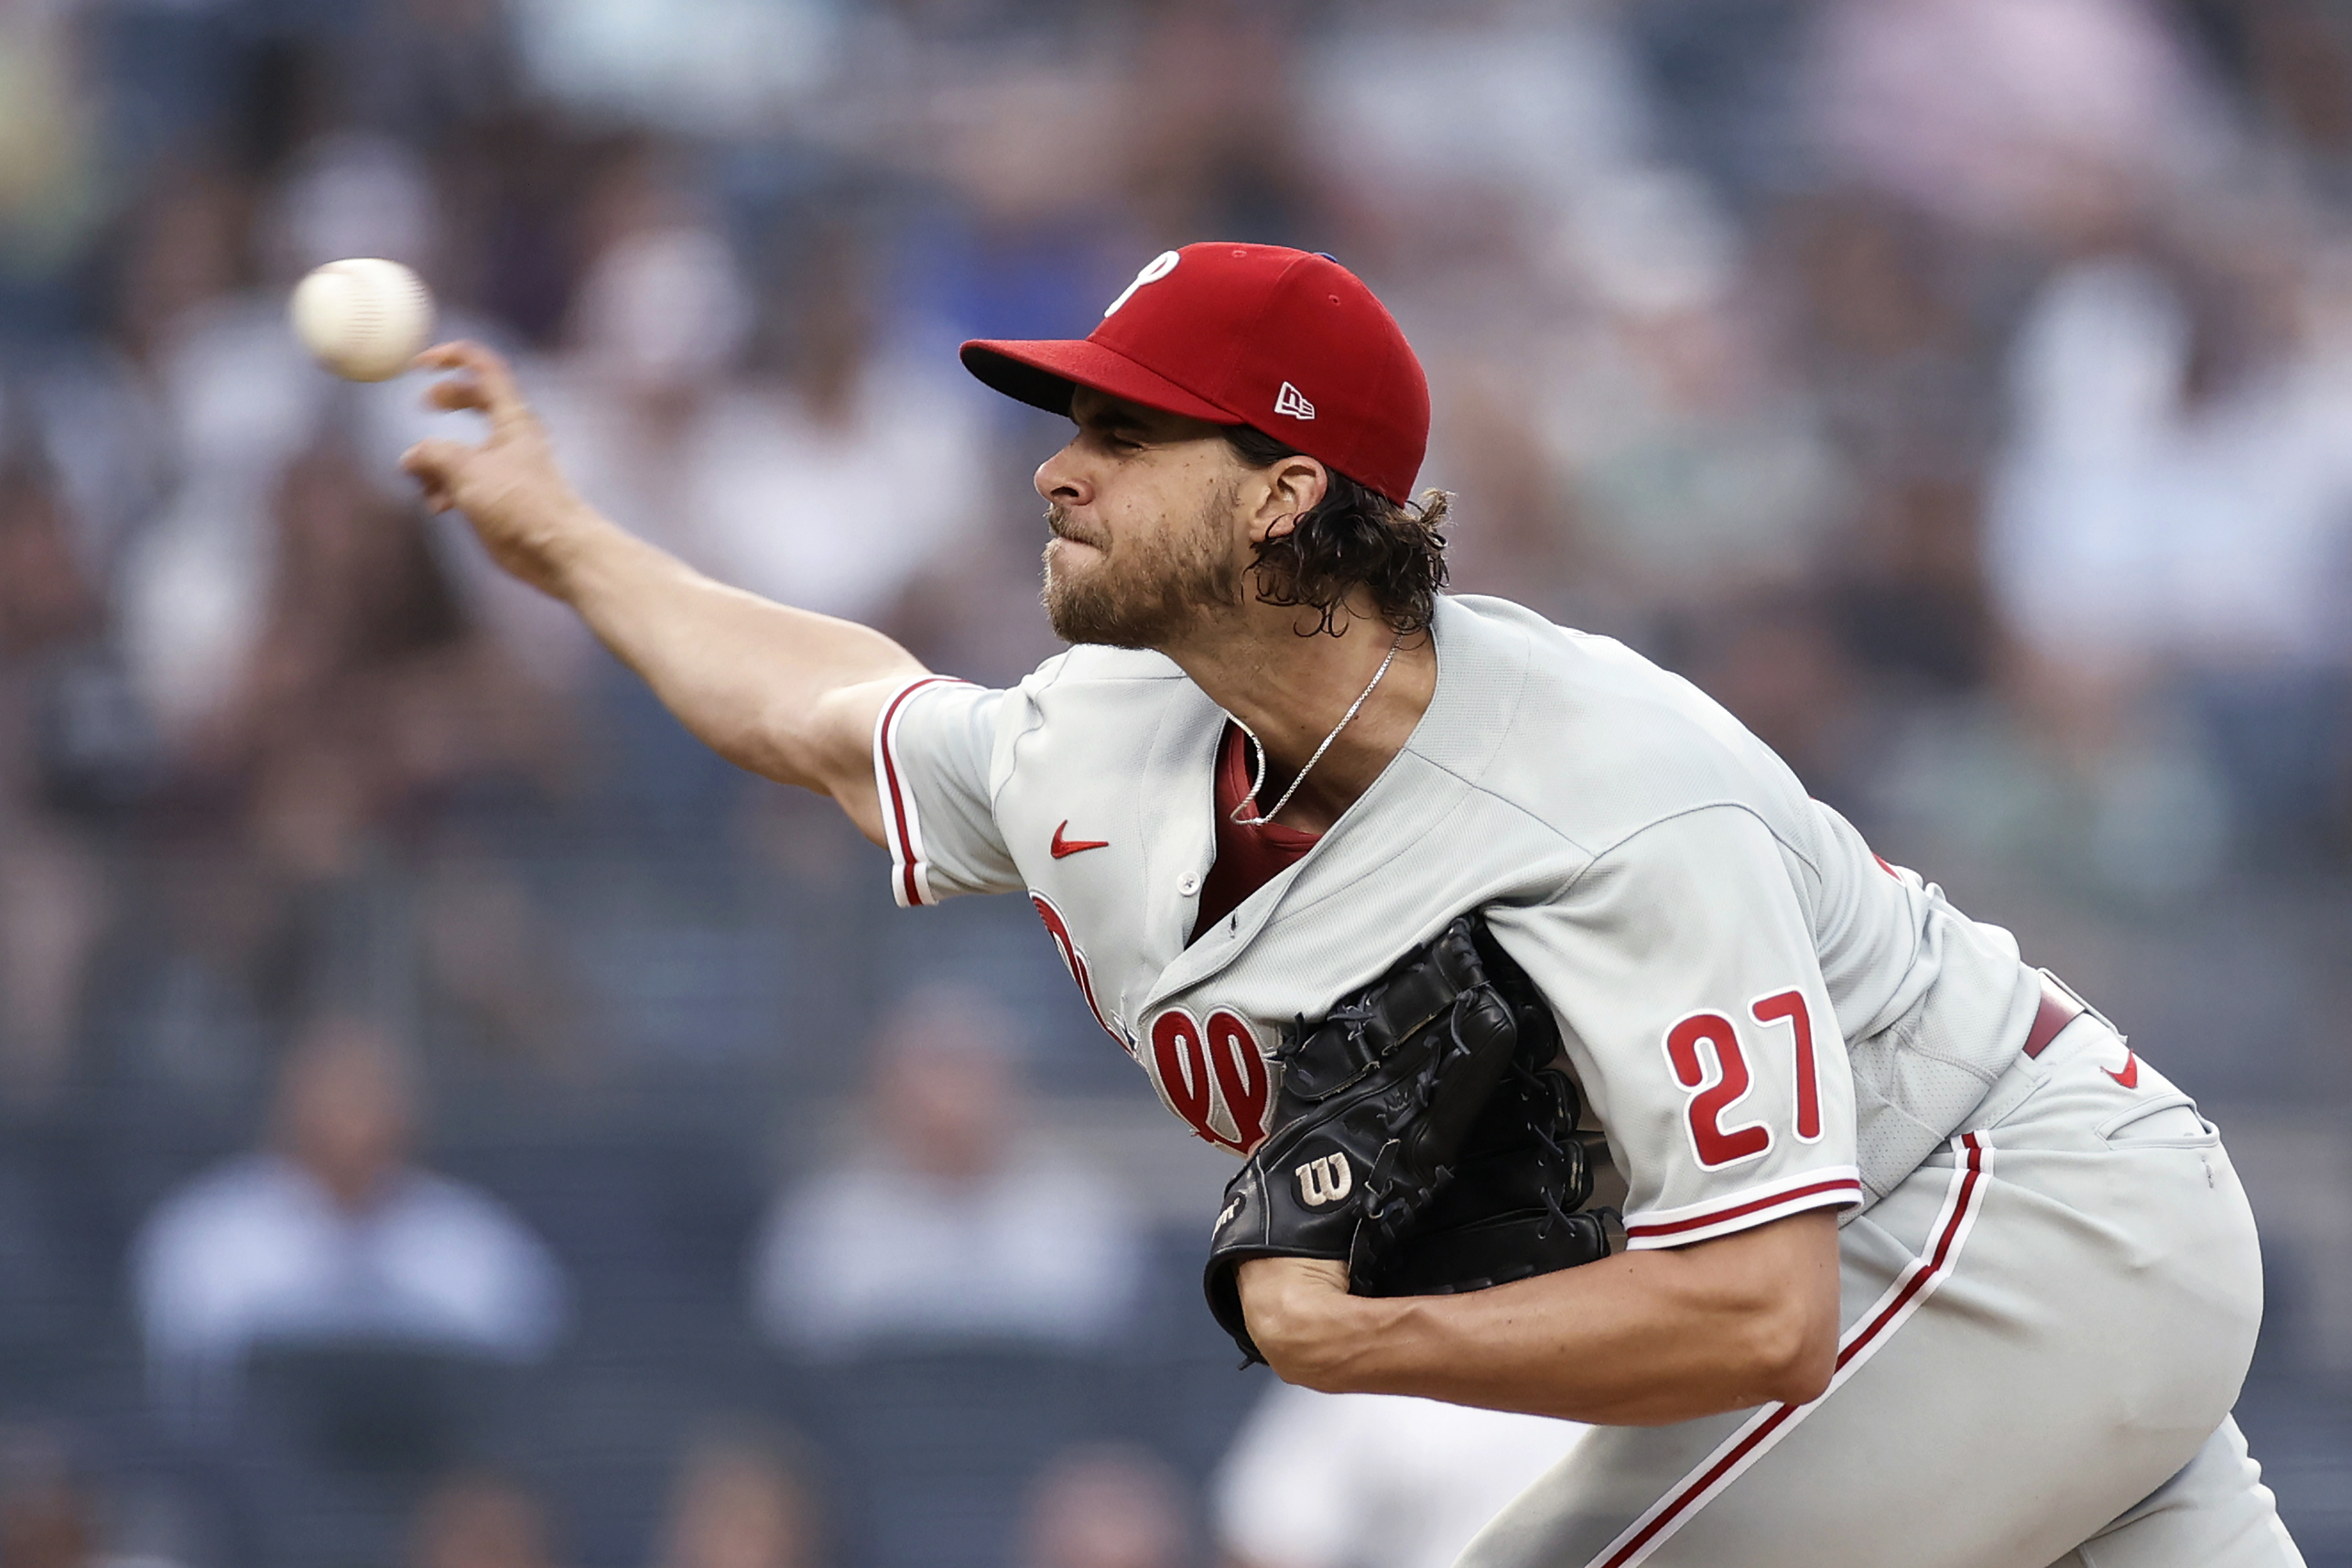 Aaron Nola's night ends in 'heartbreaking' fashion and other